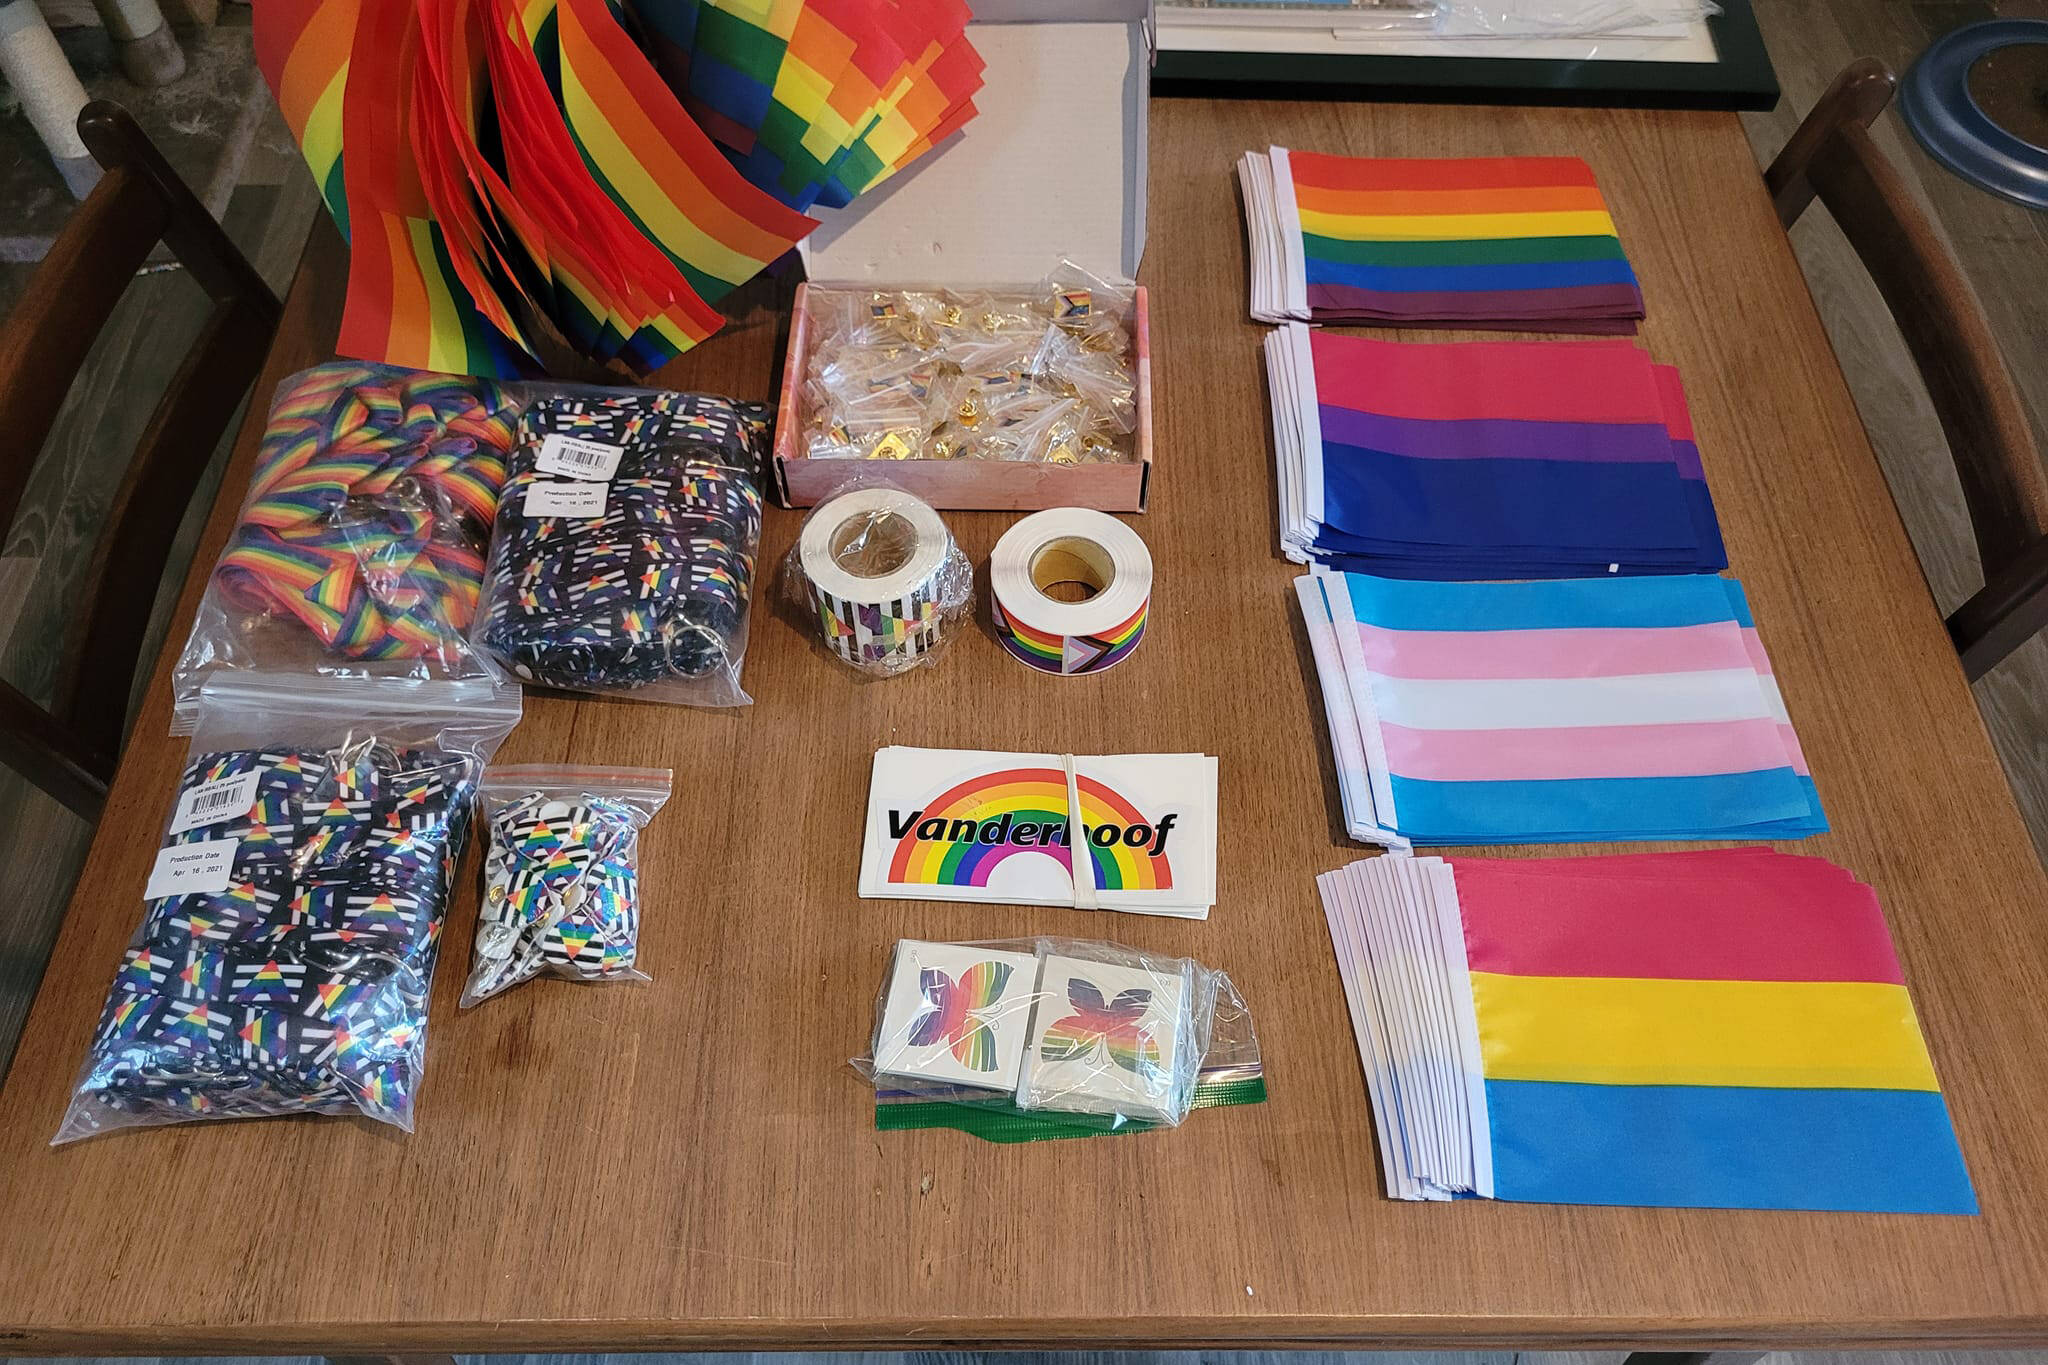 A sneak peak at some of the items that will be in a draw basket at the very first Vanderhoof Pride event. (Kjerstina Larsen/Facebook)